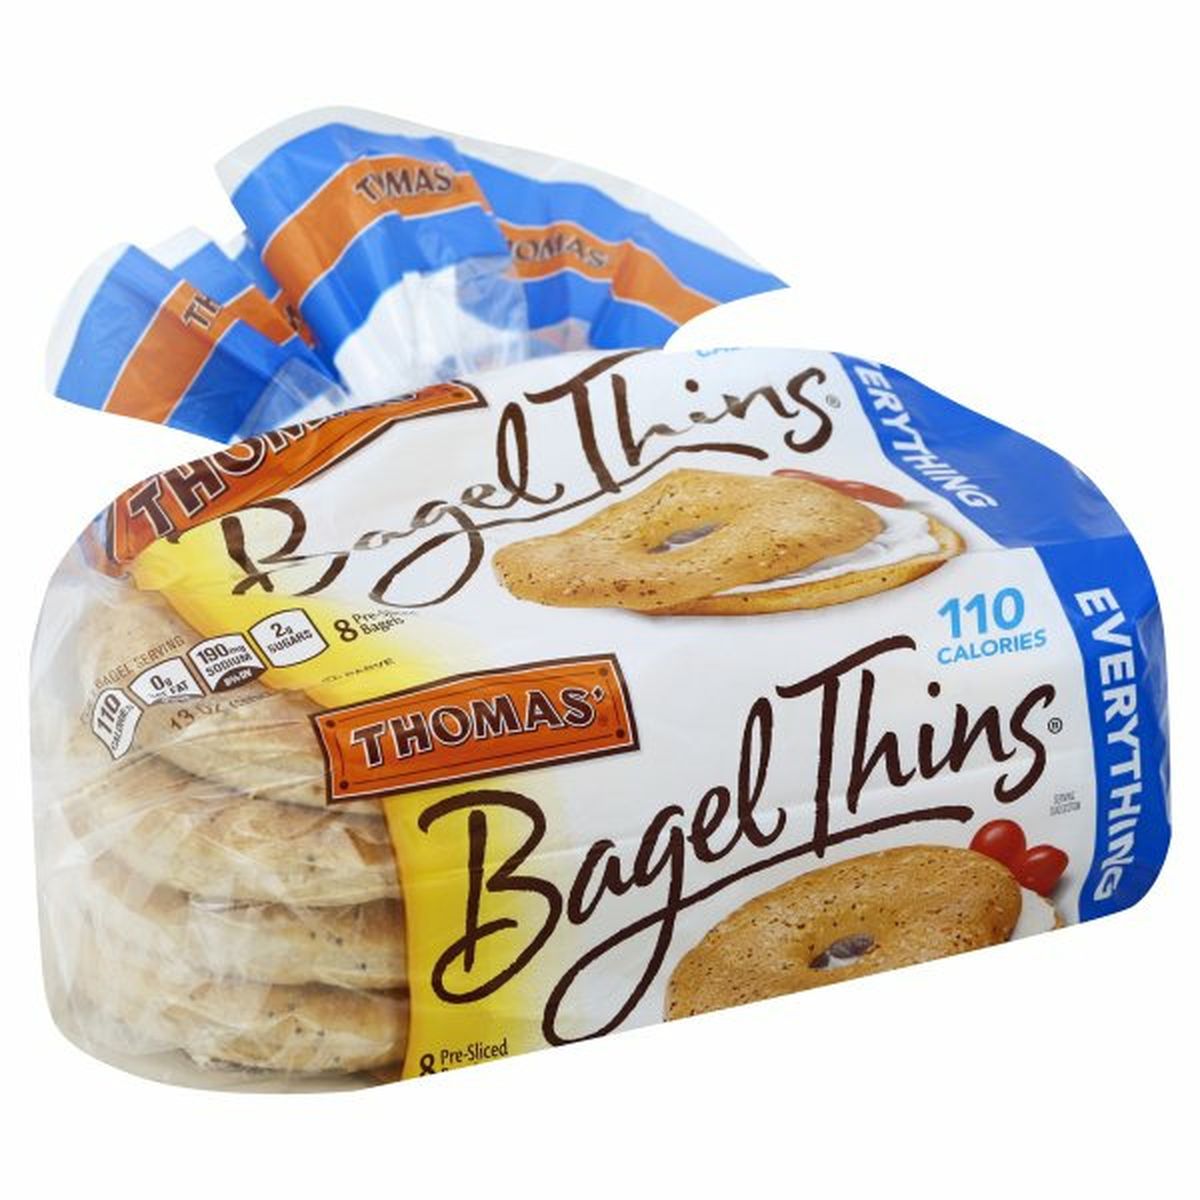 Calories in Thomasâ€™ Bagel Thins, Everything, Pre-Sliced